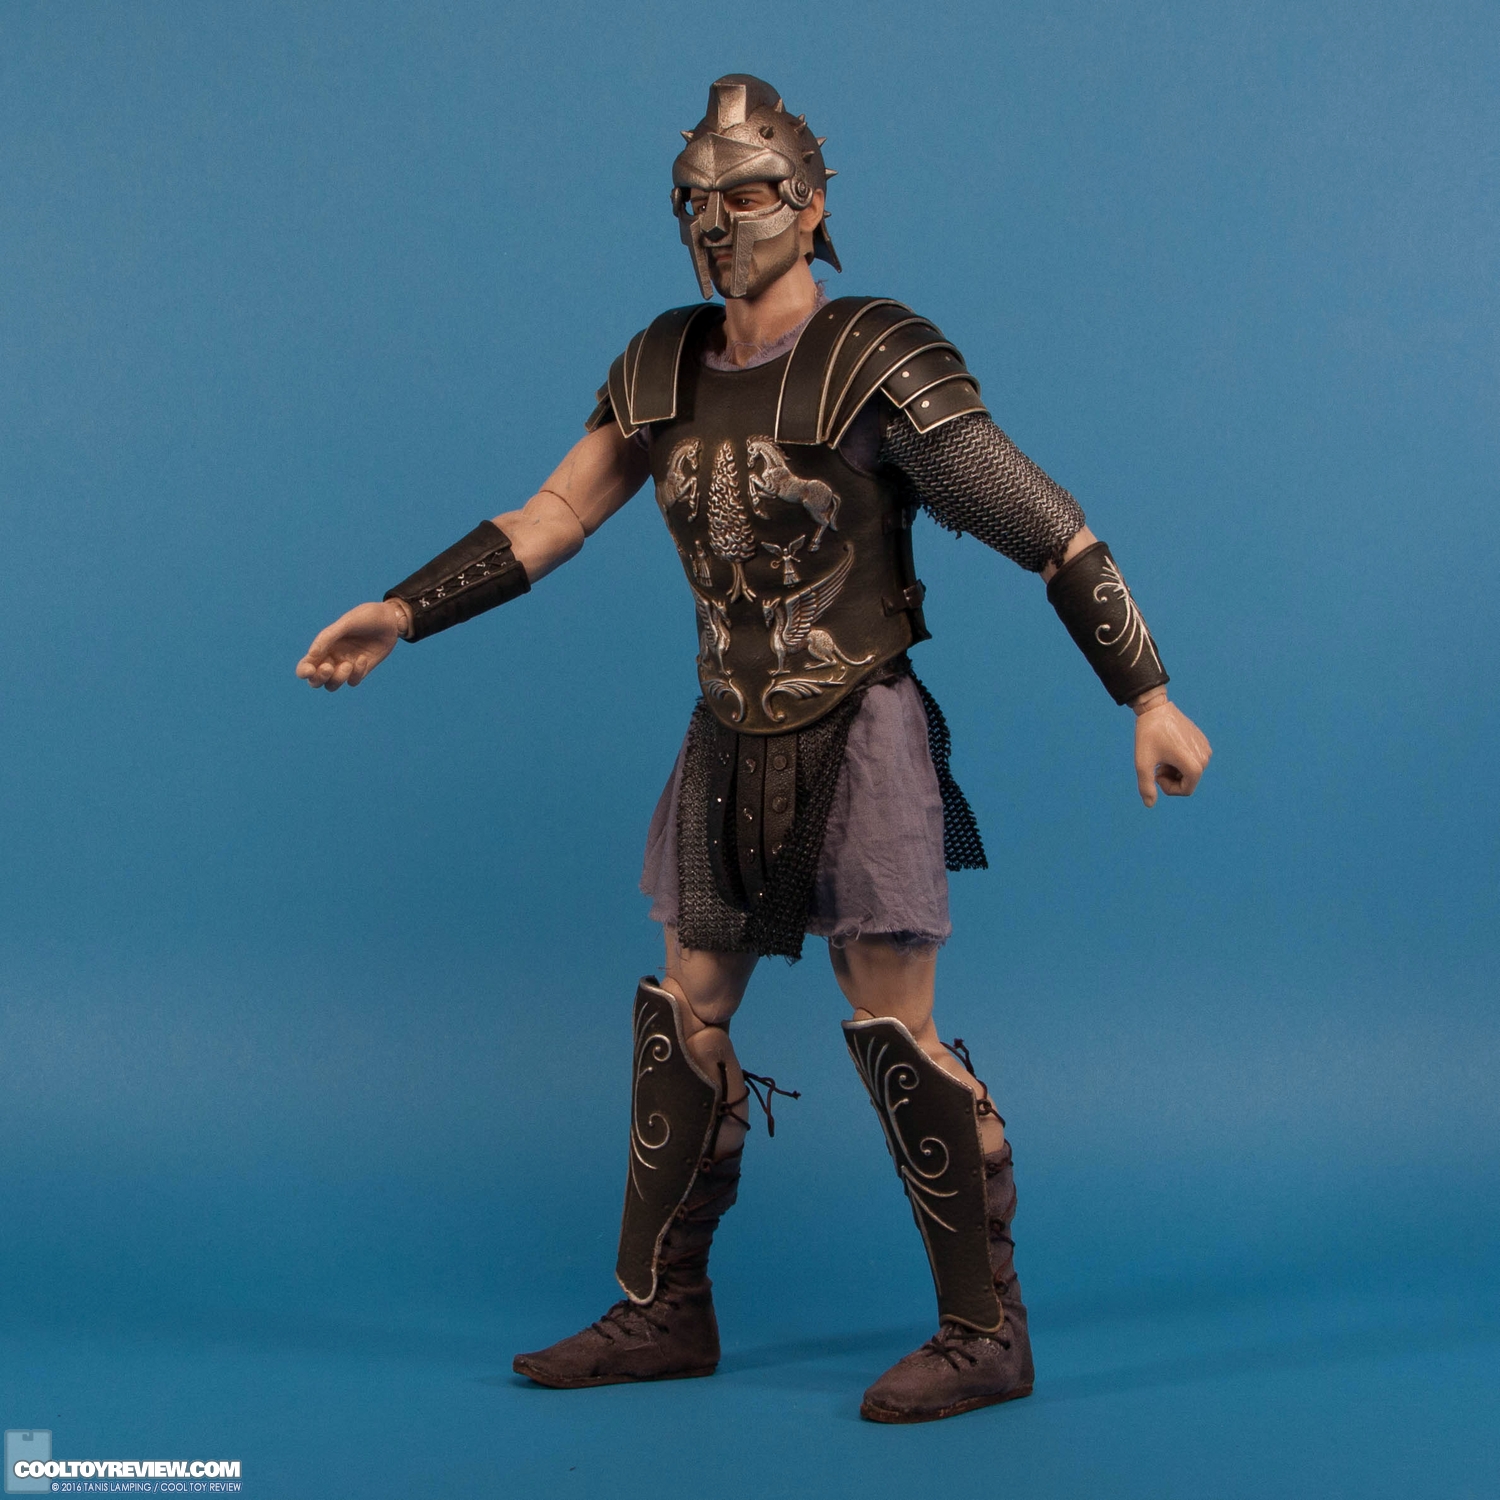 pangaea-toy-gladiator-general-sixth-scale-collectible-figure-011.jpg